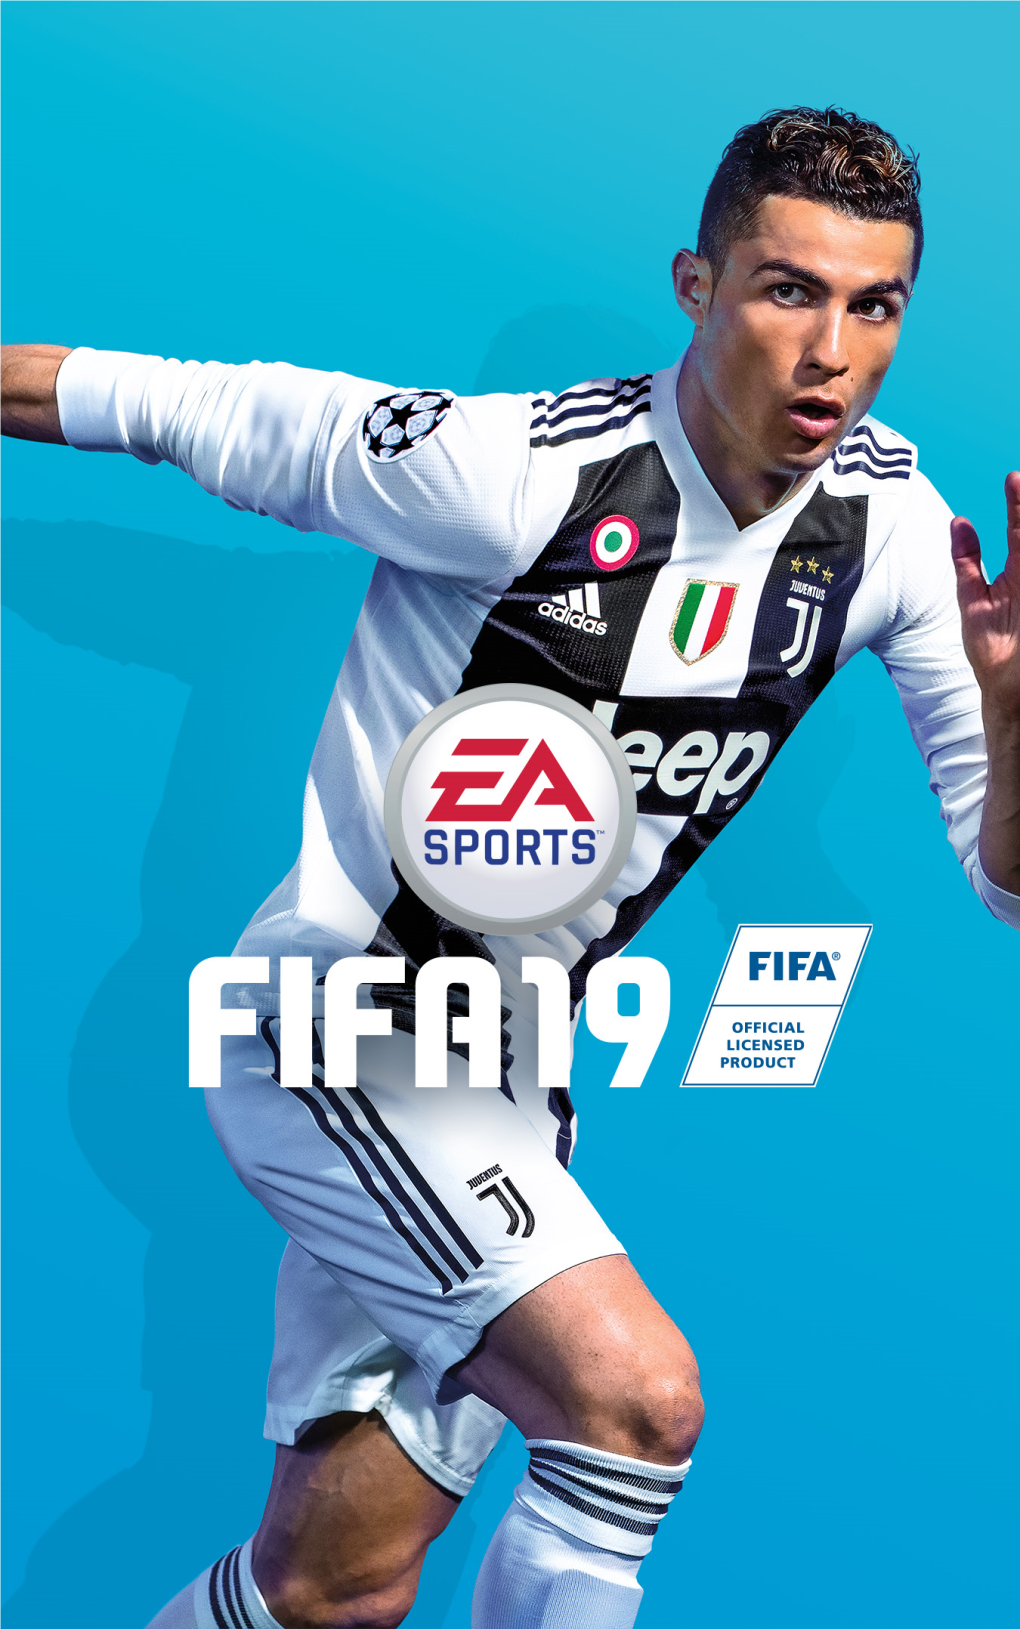 FIFA 19 on PC Allows You to Play the Game on a Variety of Control Devices